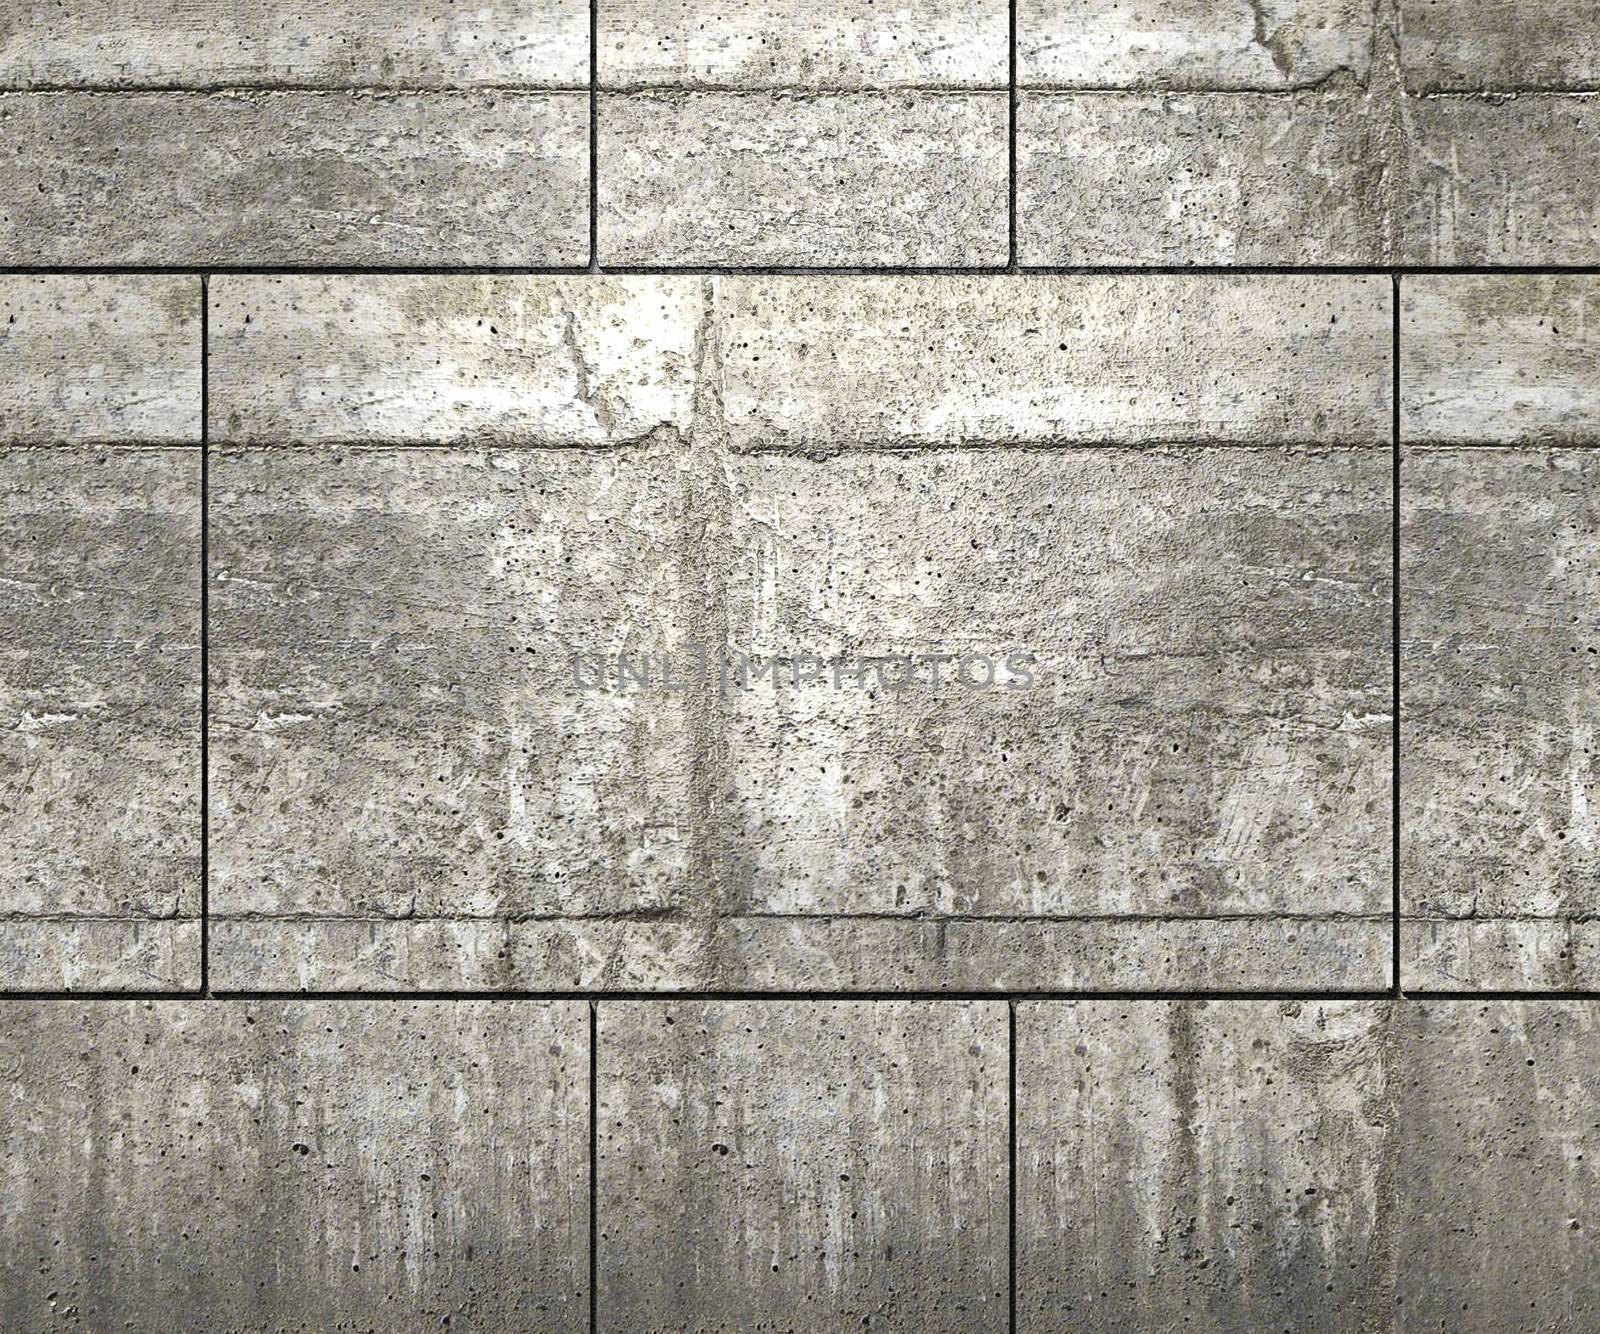 Textured concrete blocks wall or floor background 